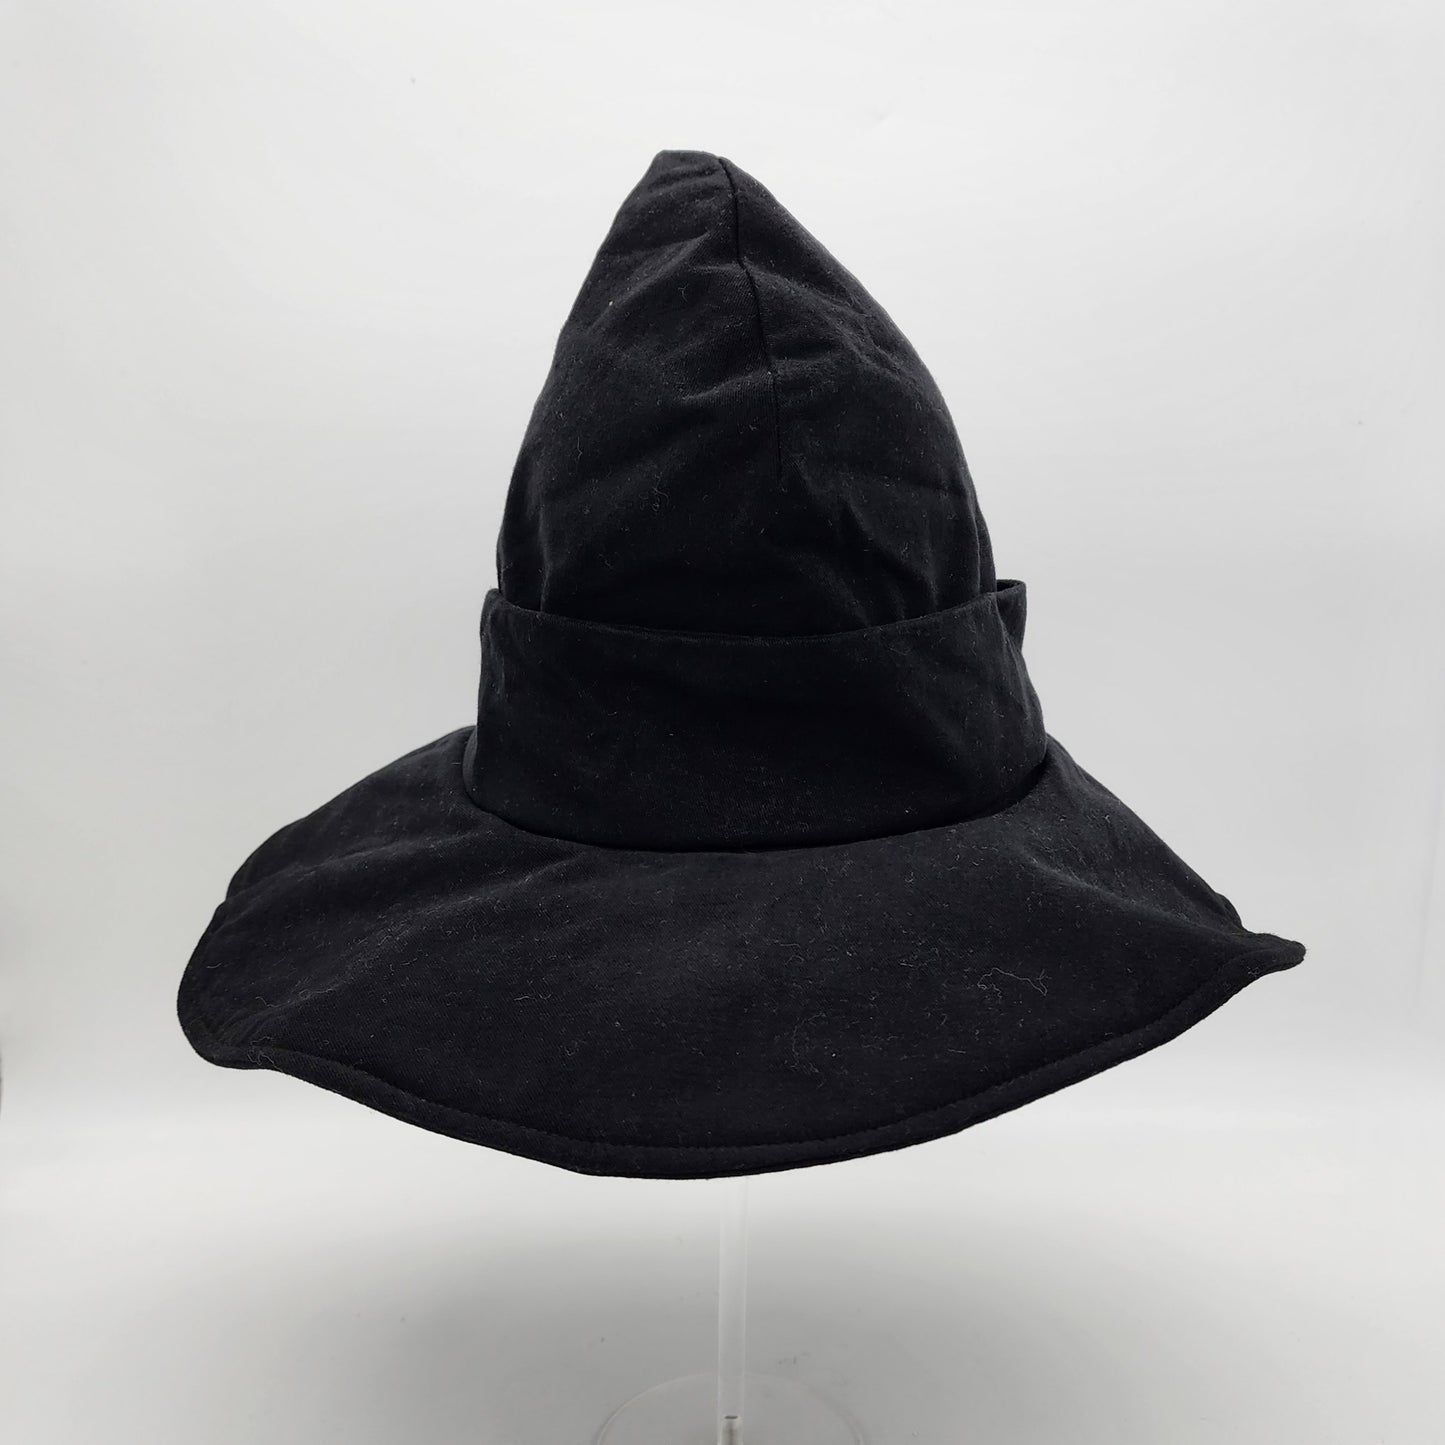 Butterfly Witch Hat- Black with Black and White Embroidery